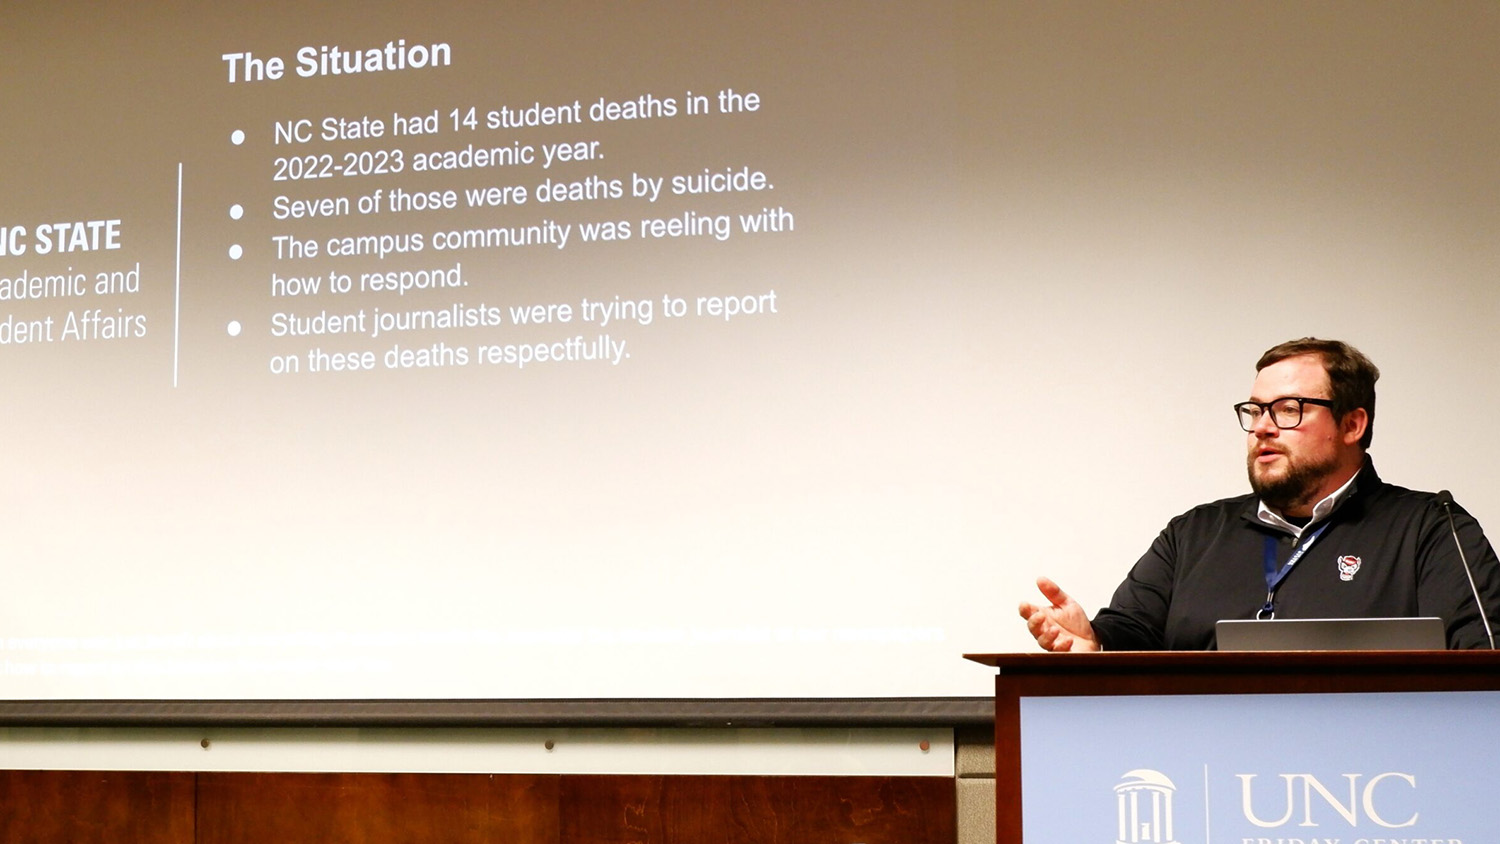 Ben McNeely, who advises Nubian Message and Technician, speaks to UNC administrators about the vital role their student media can play in addressing mental health issues on campus.